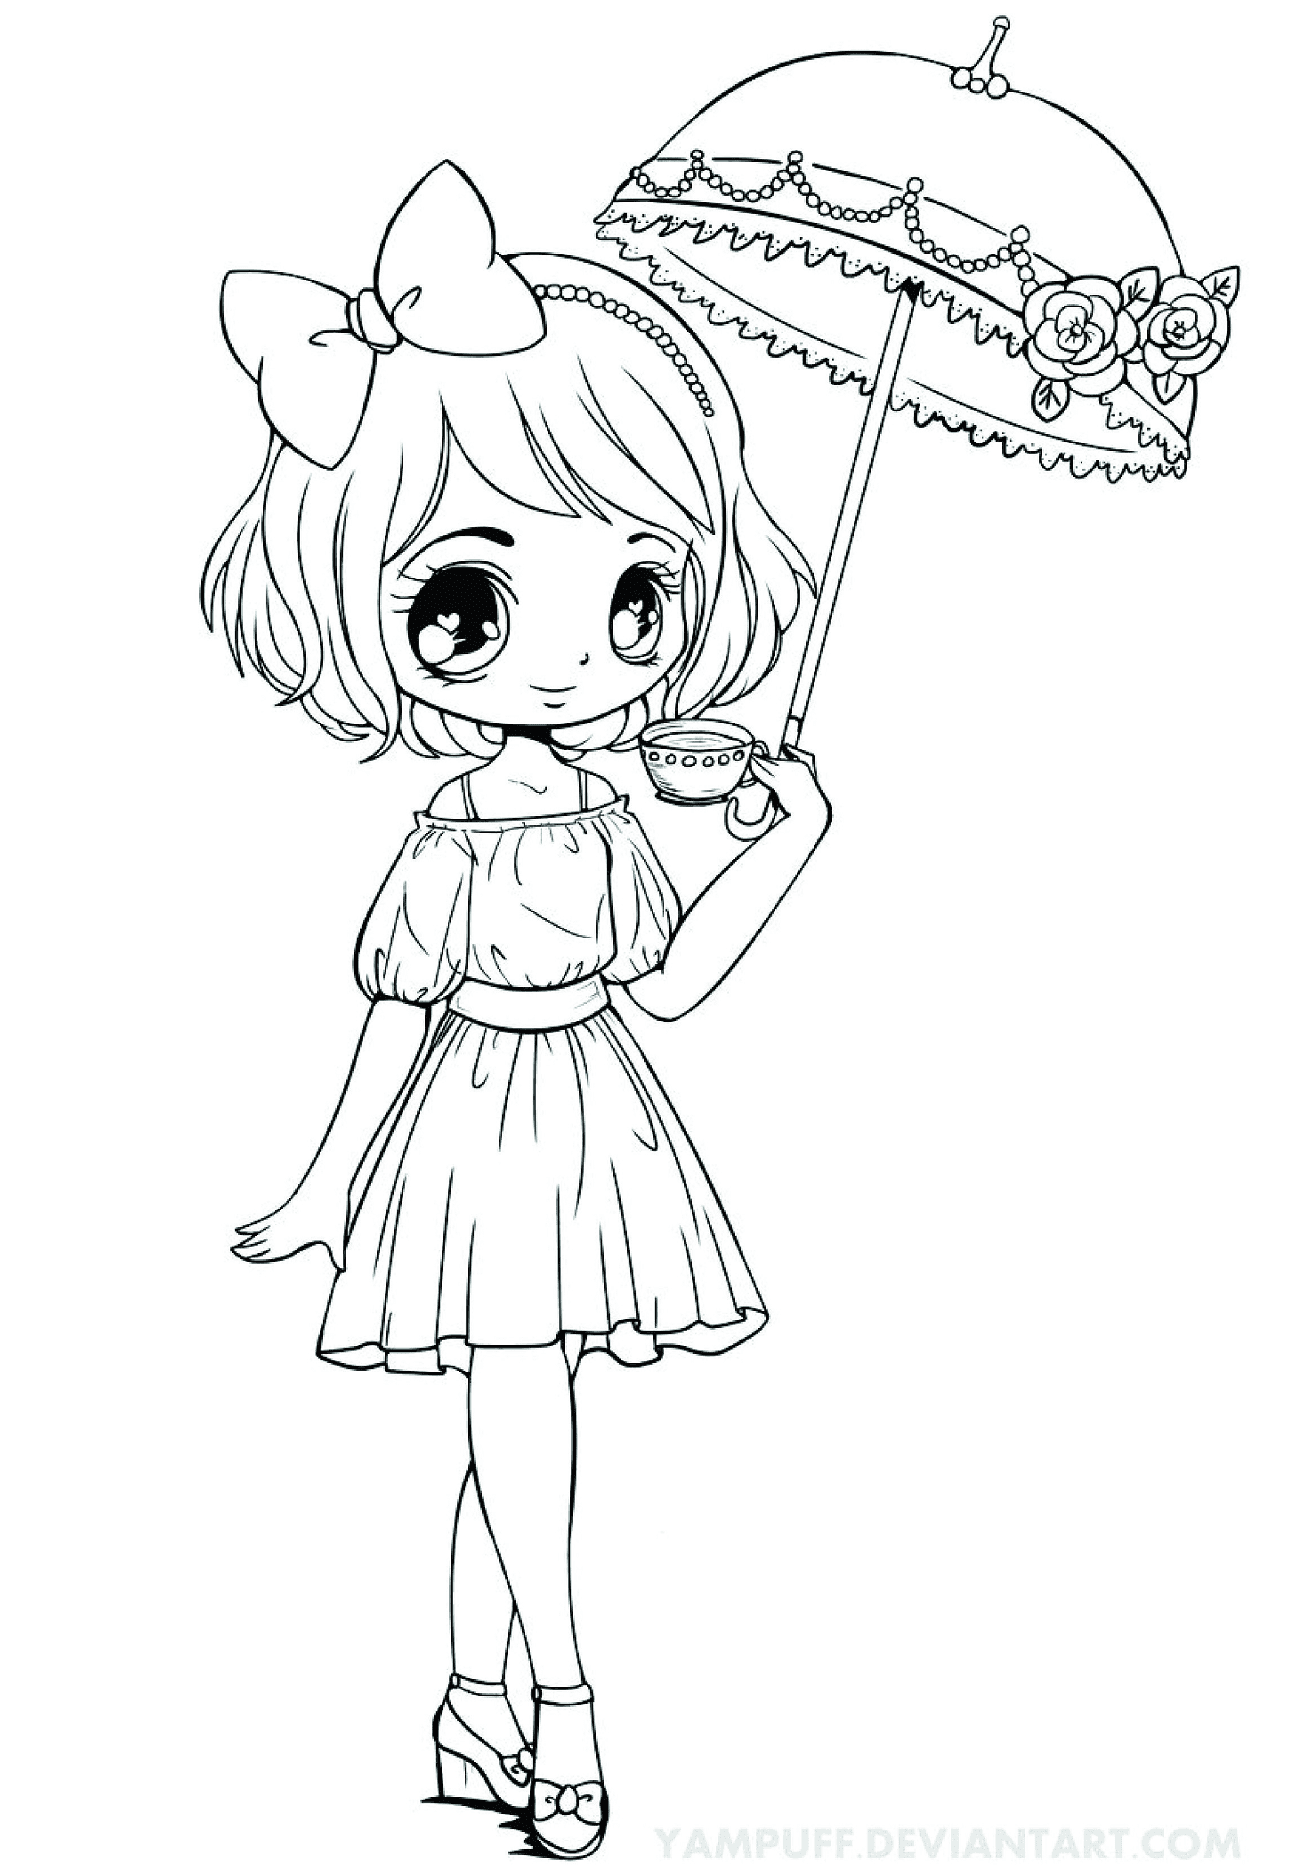 Cute Chibi Girl Coloring Pages